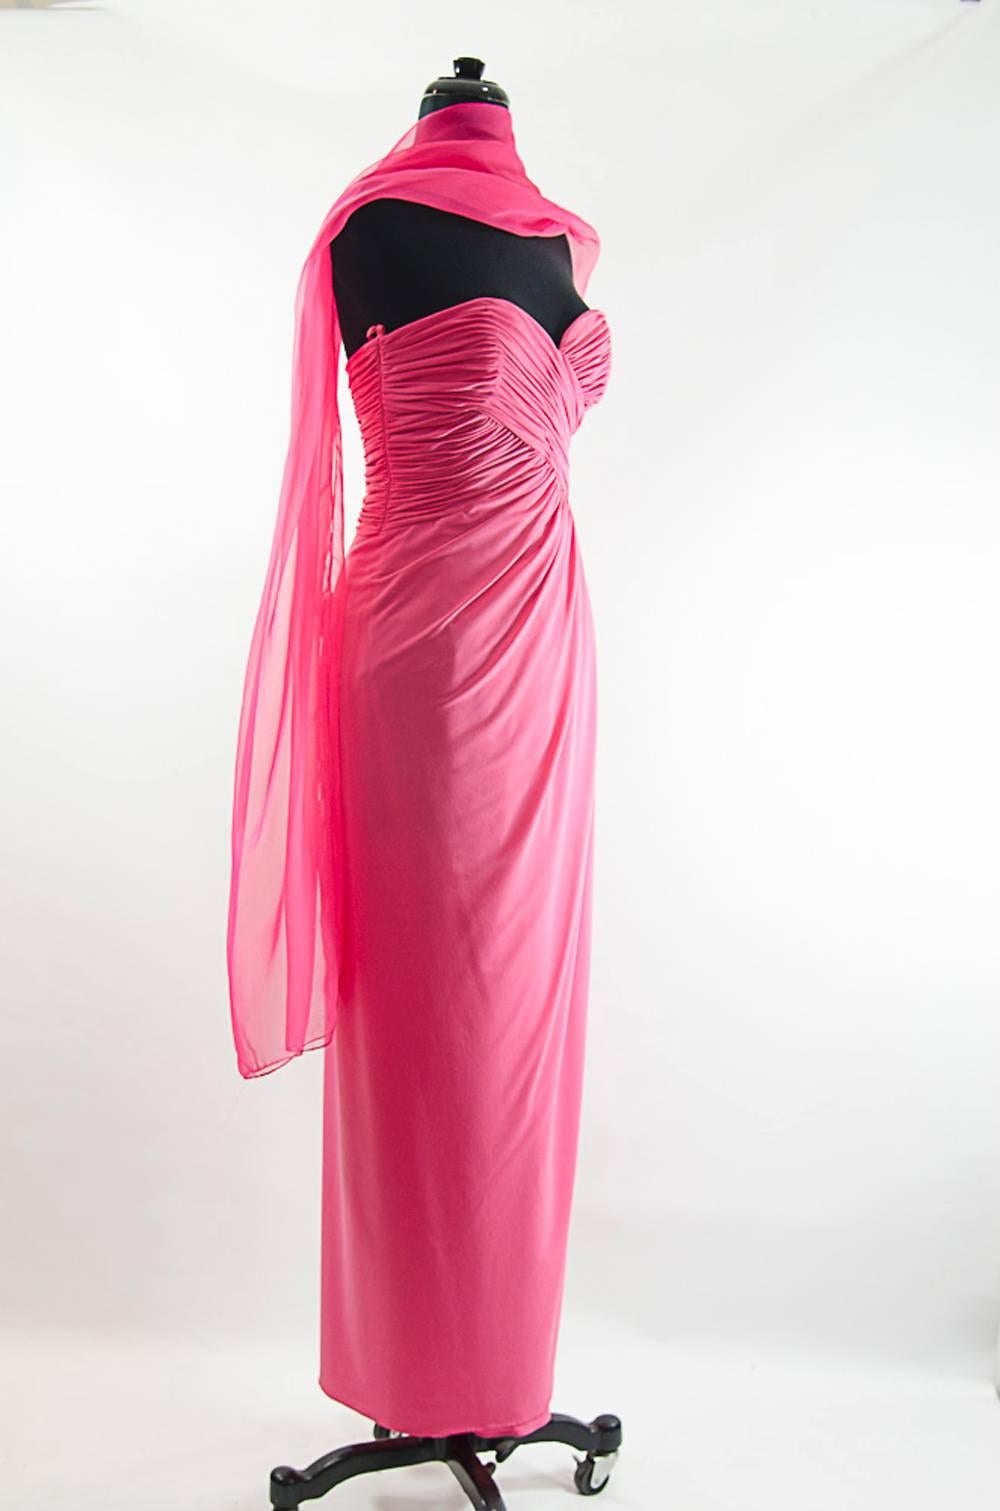 Truly stunning! Victor Costa silk chiffon Hollywood strapless pink gown with long shawl. Boned and structured bodice corset. Sweetheart neckline . Size 2-4 with bust 34